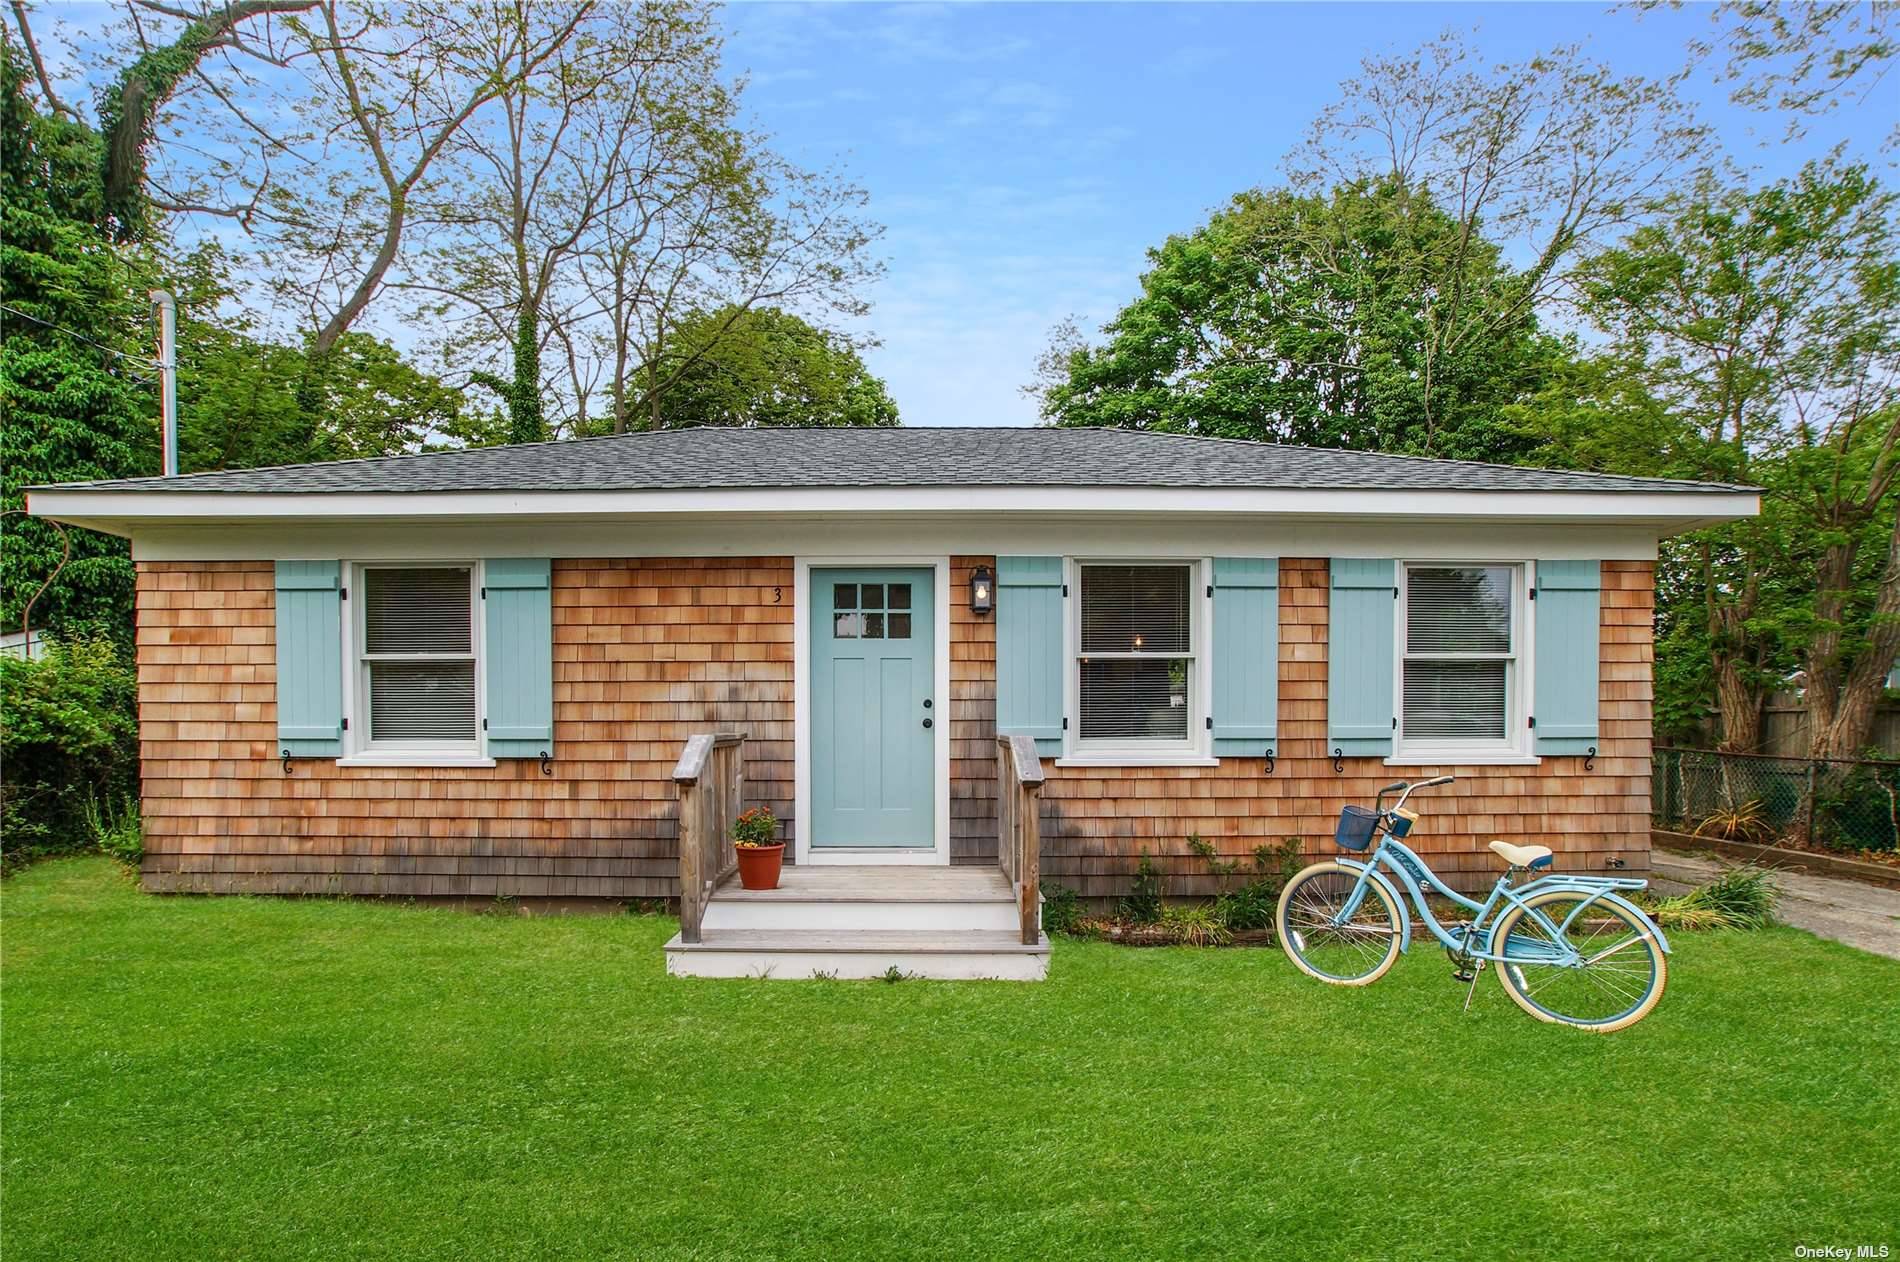 Gorgeous, newly renovated 2 bedroom, 1 bath beach cottage available in the quaint village of East Quogue.